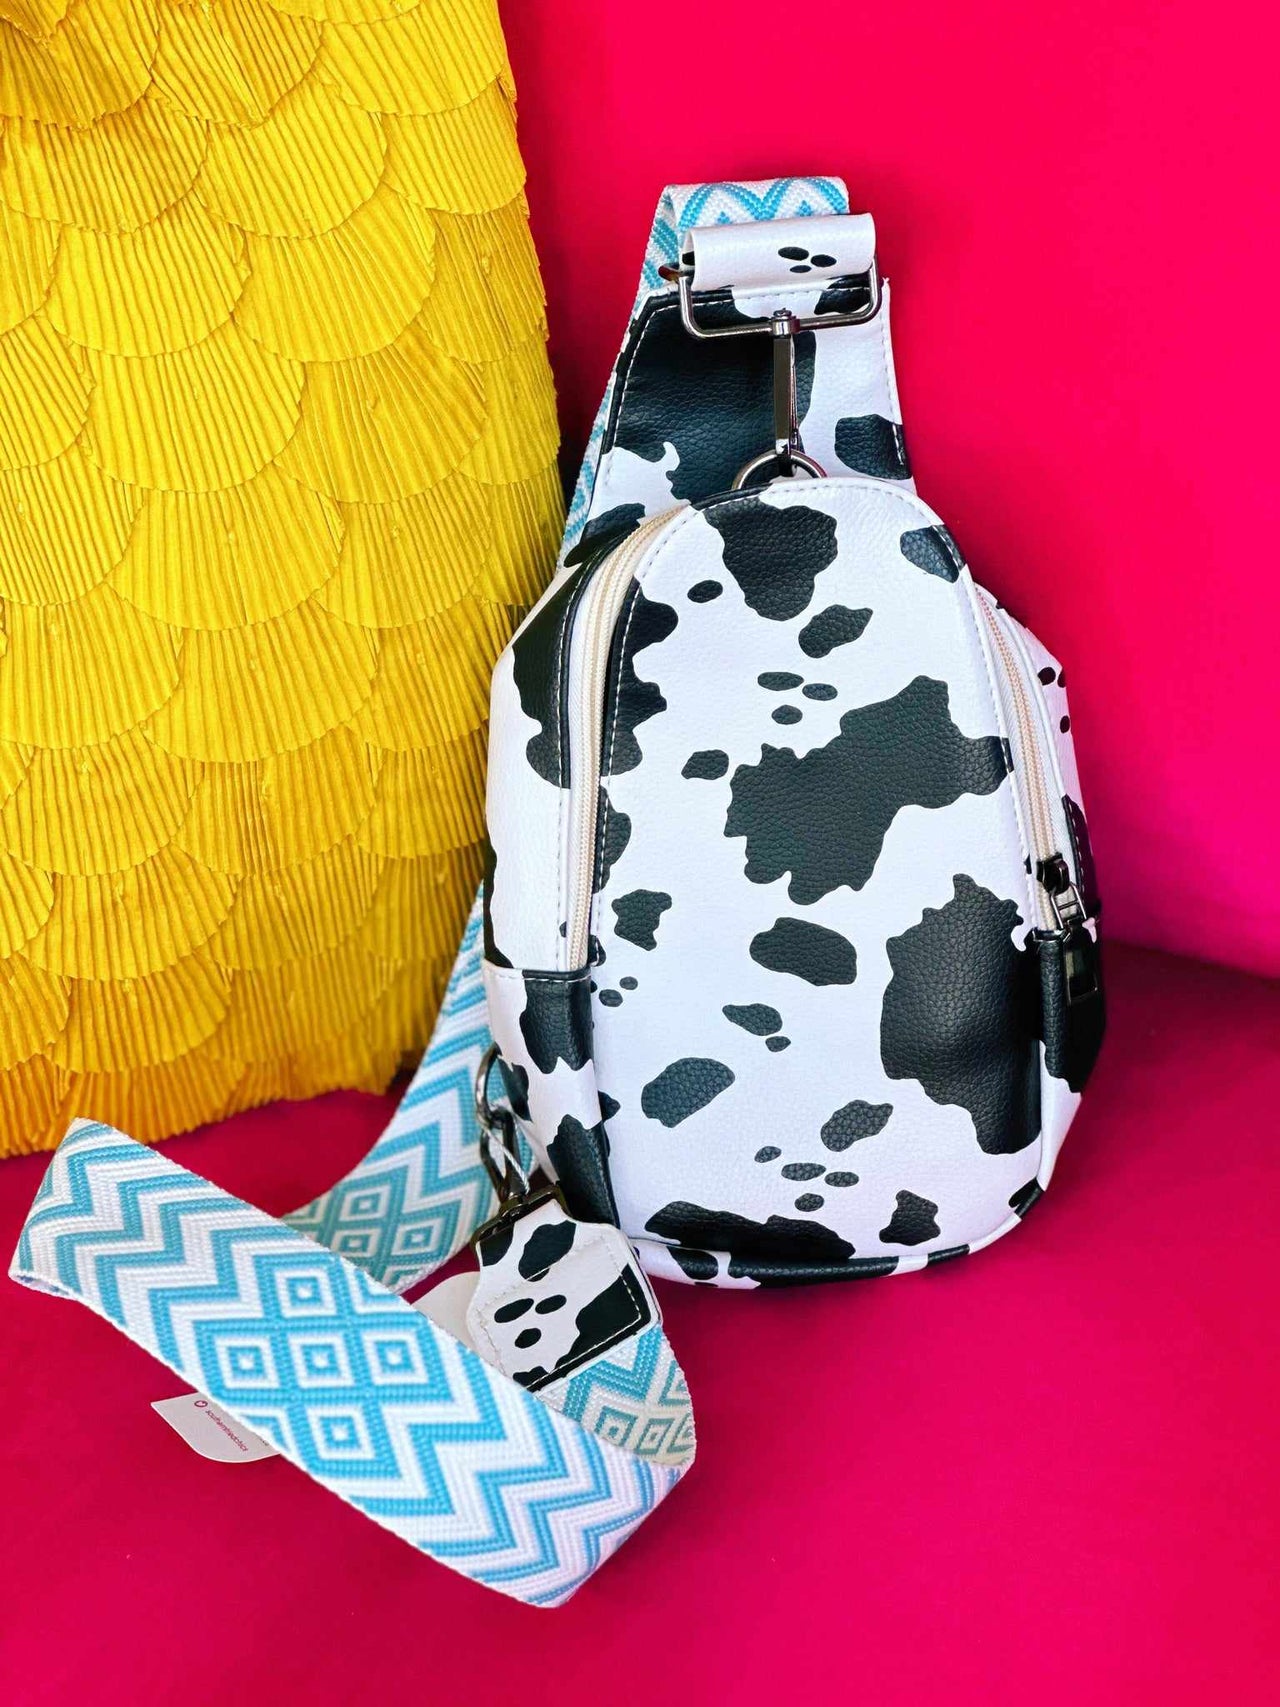 PREMIUM On The Go Cow Print With Diamond Turquoise Strap Sling Bag